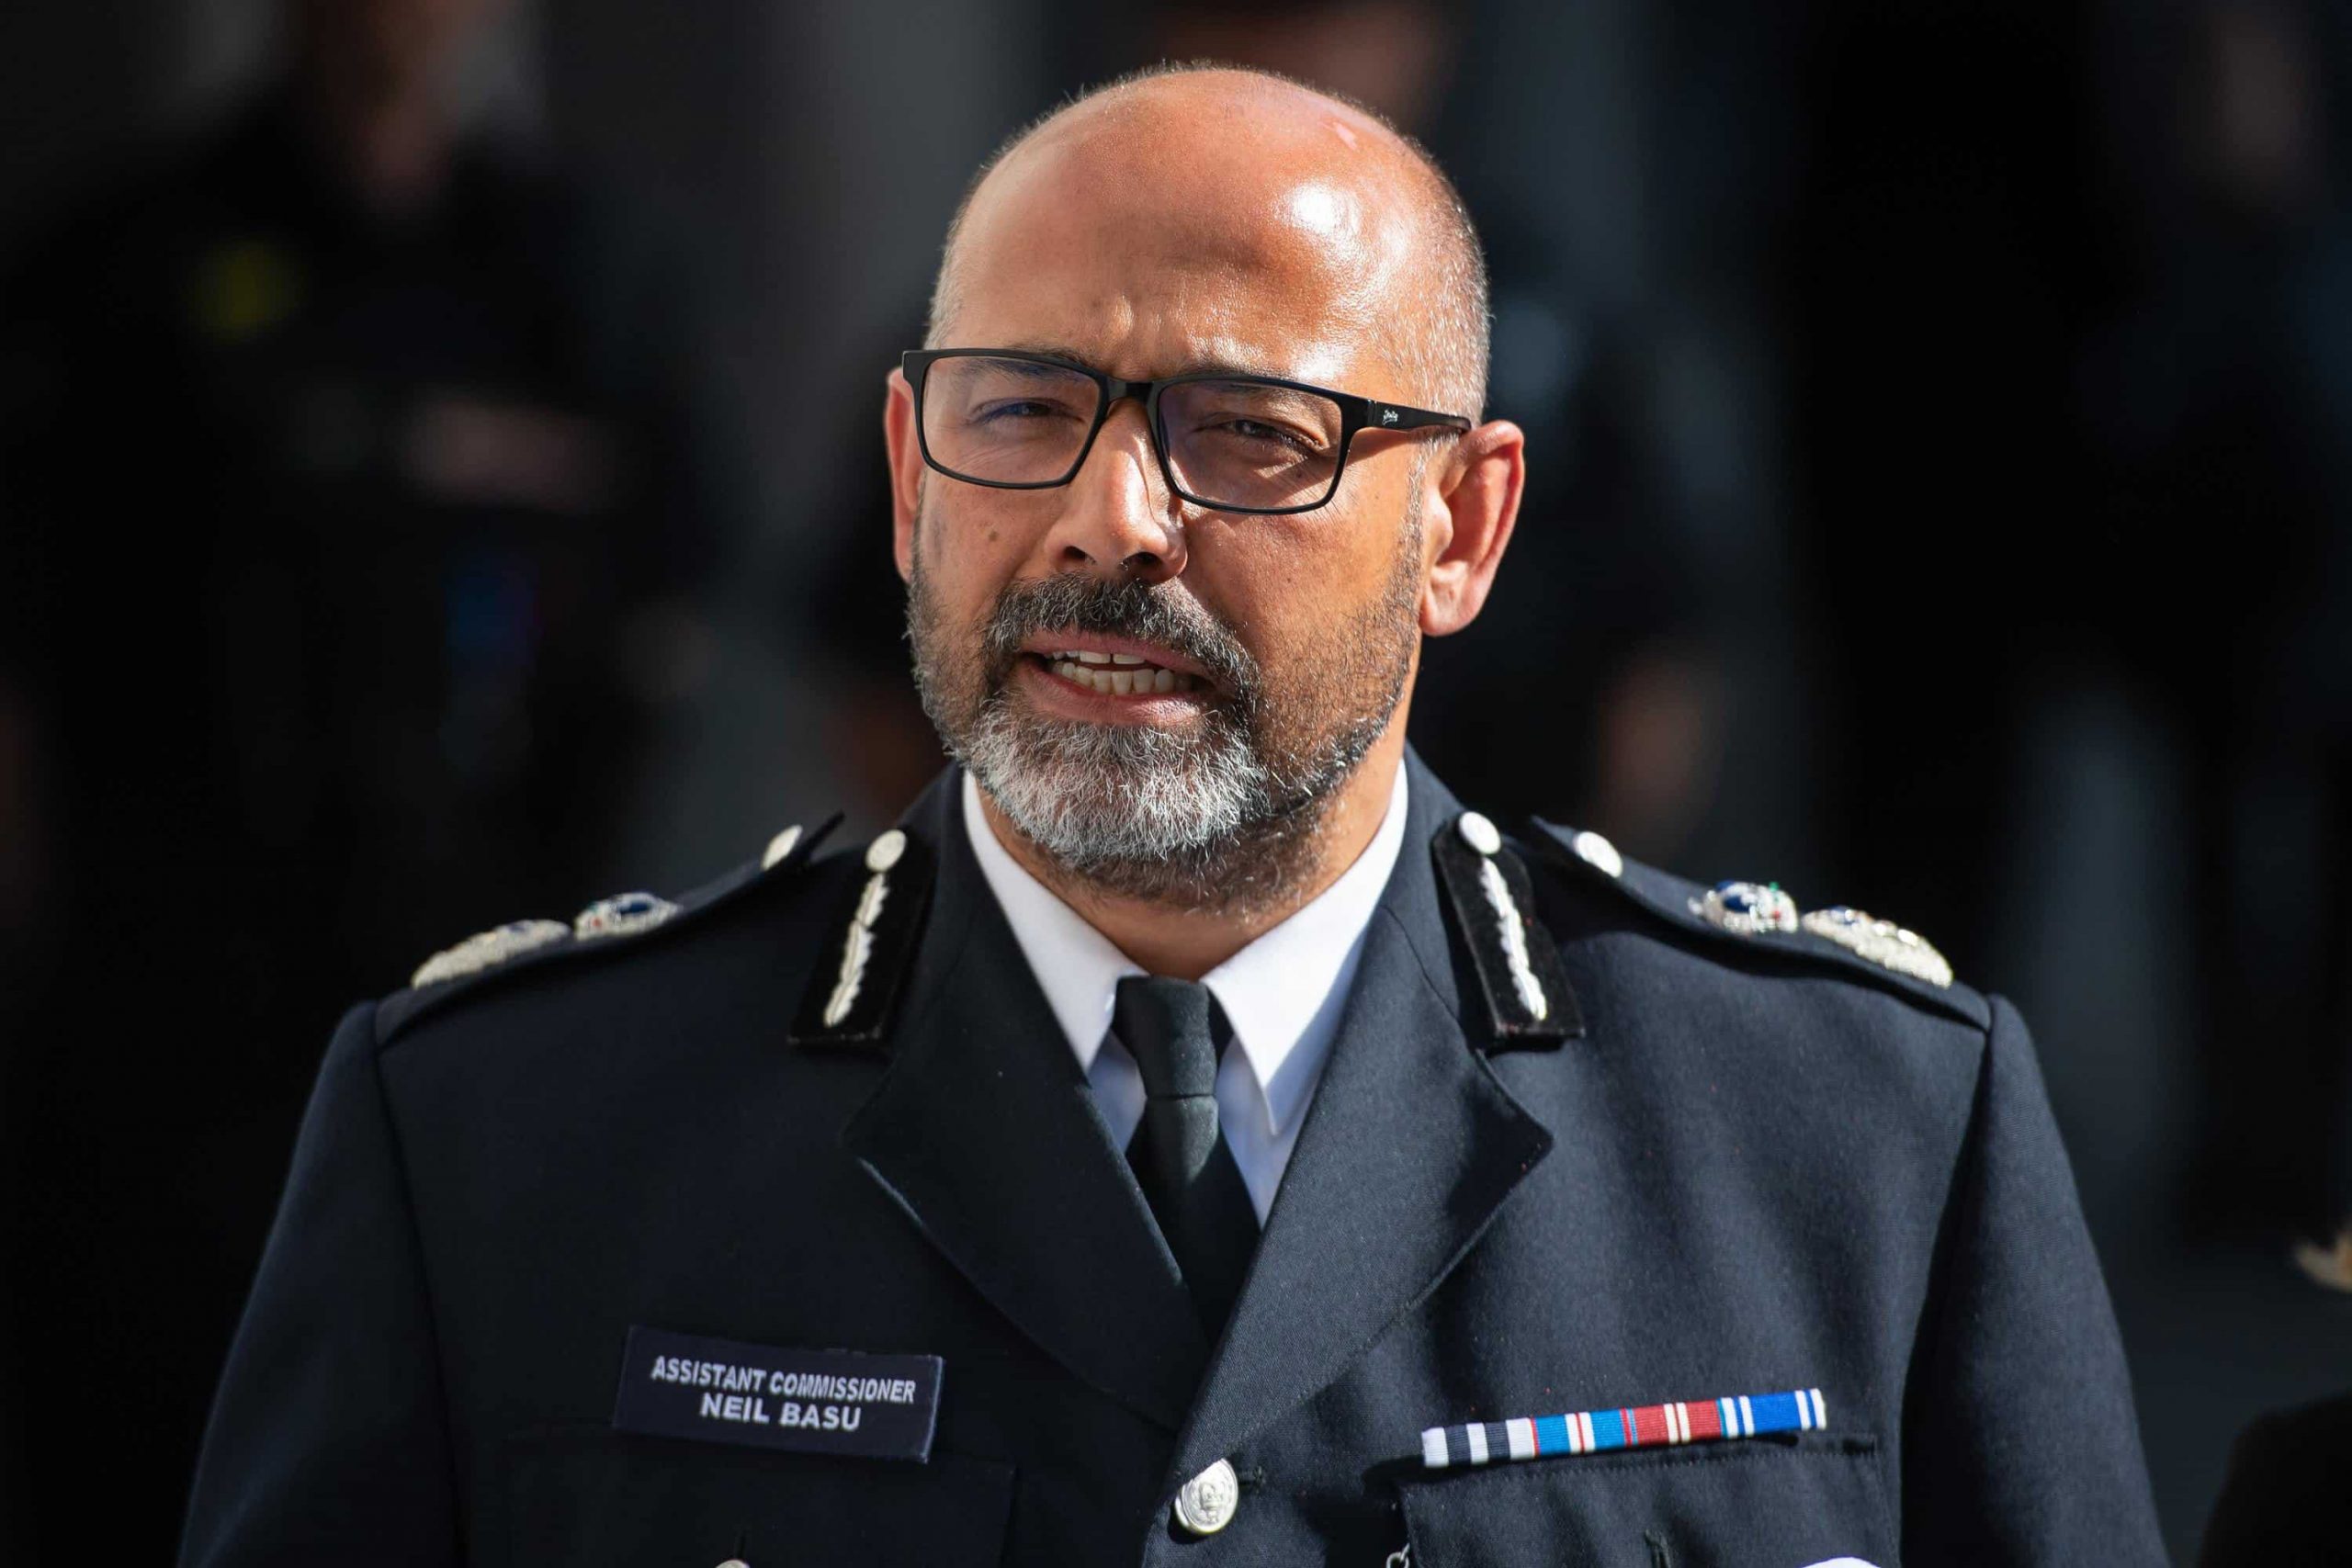 Right-wing extremism fastest-growing threat in UK, counter-terror chief warns